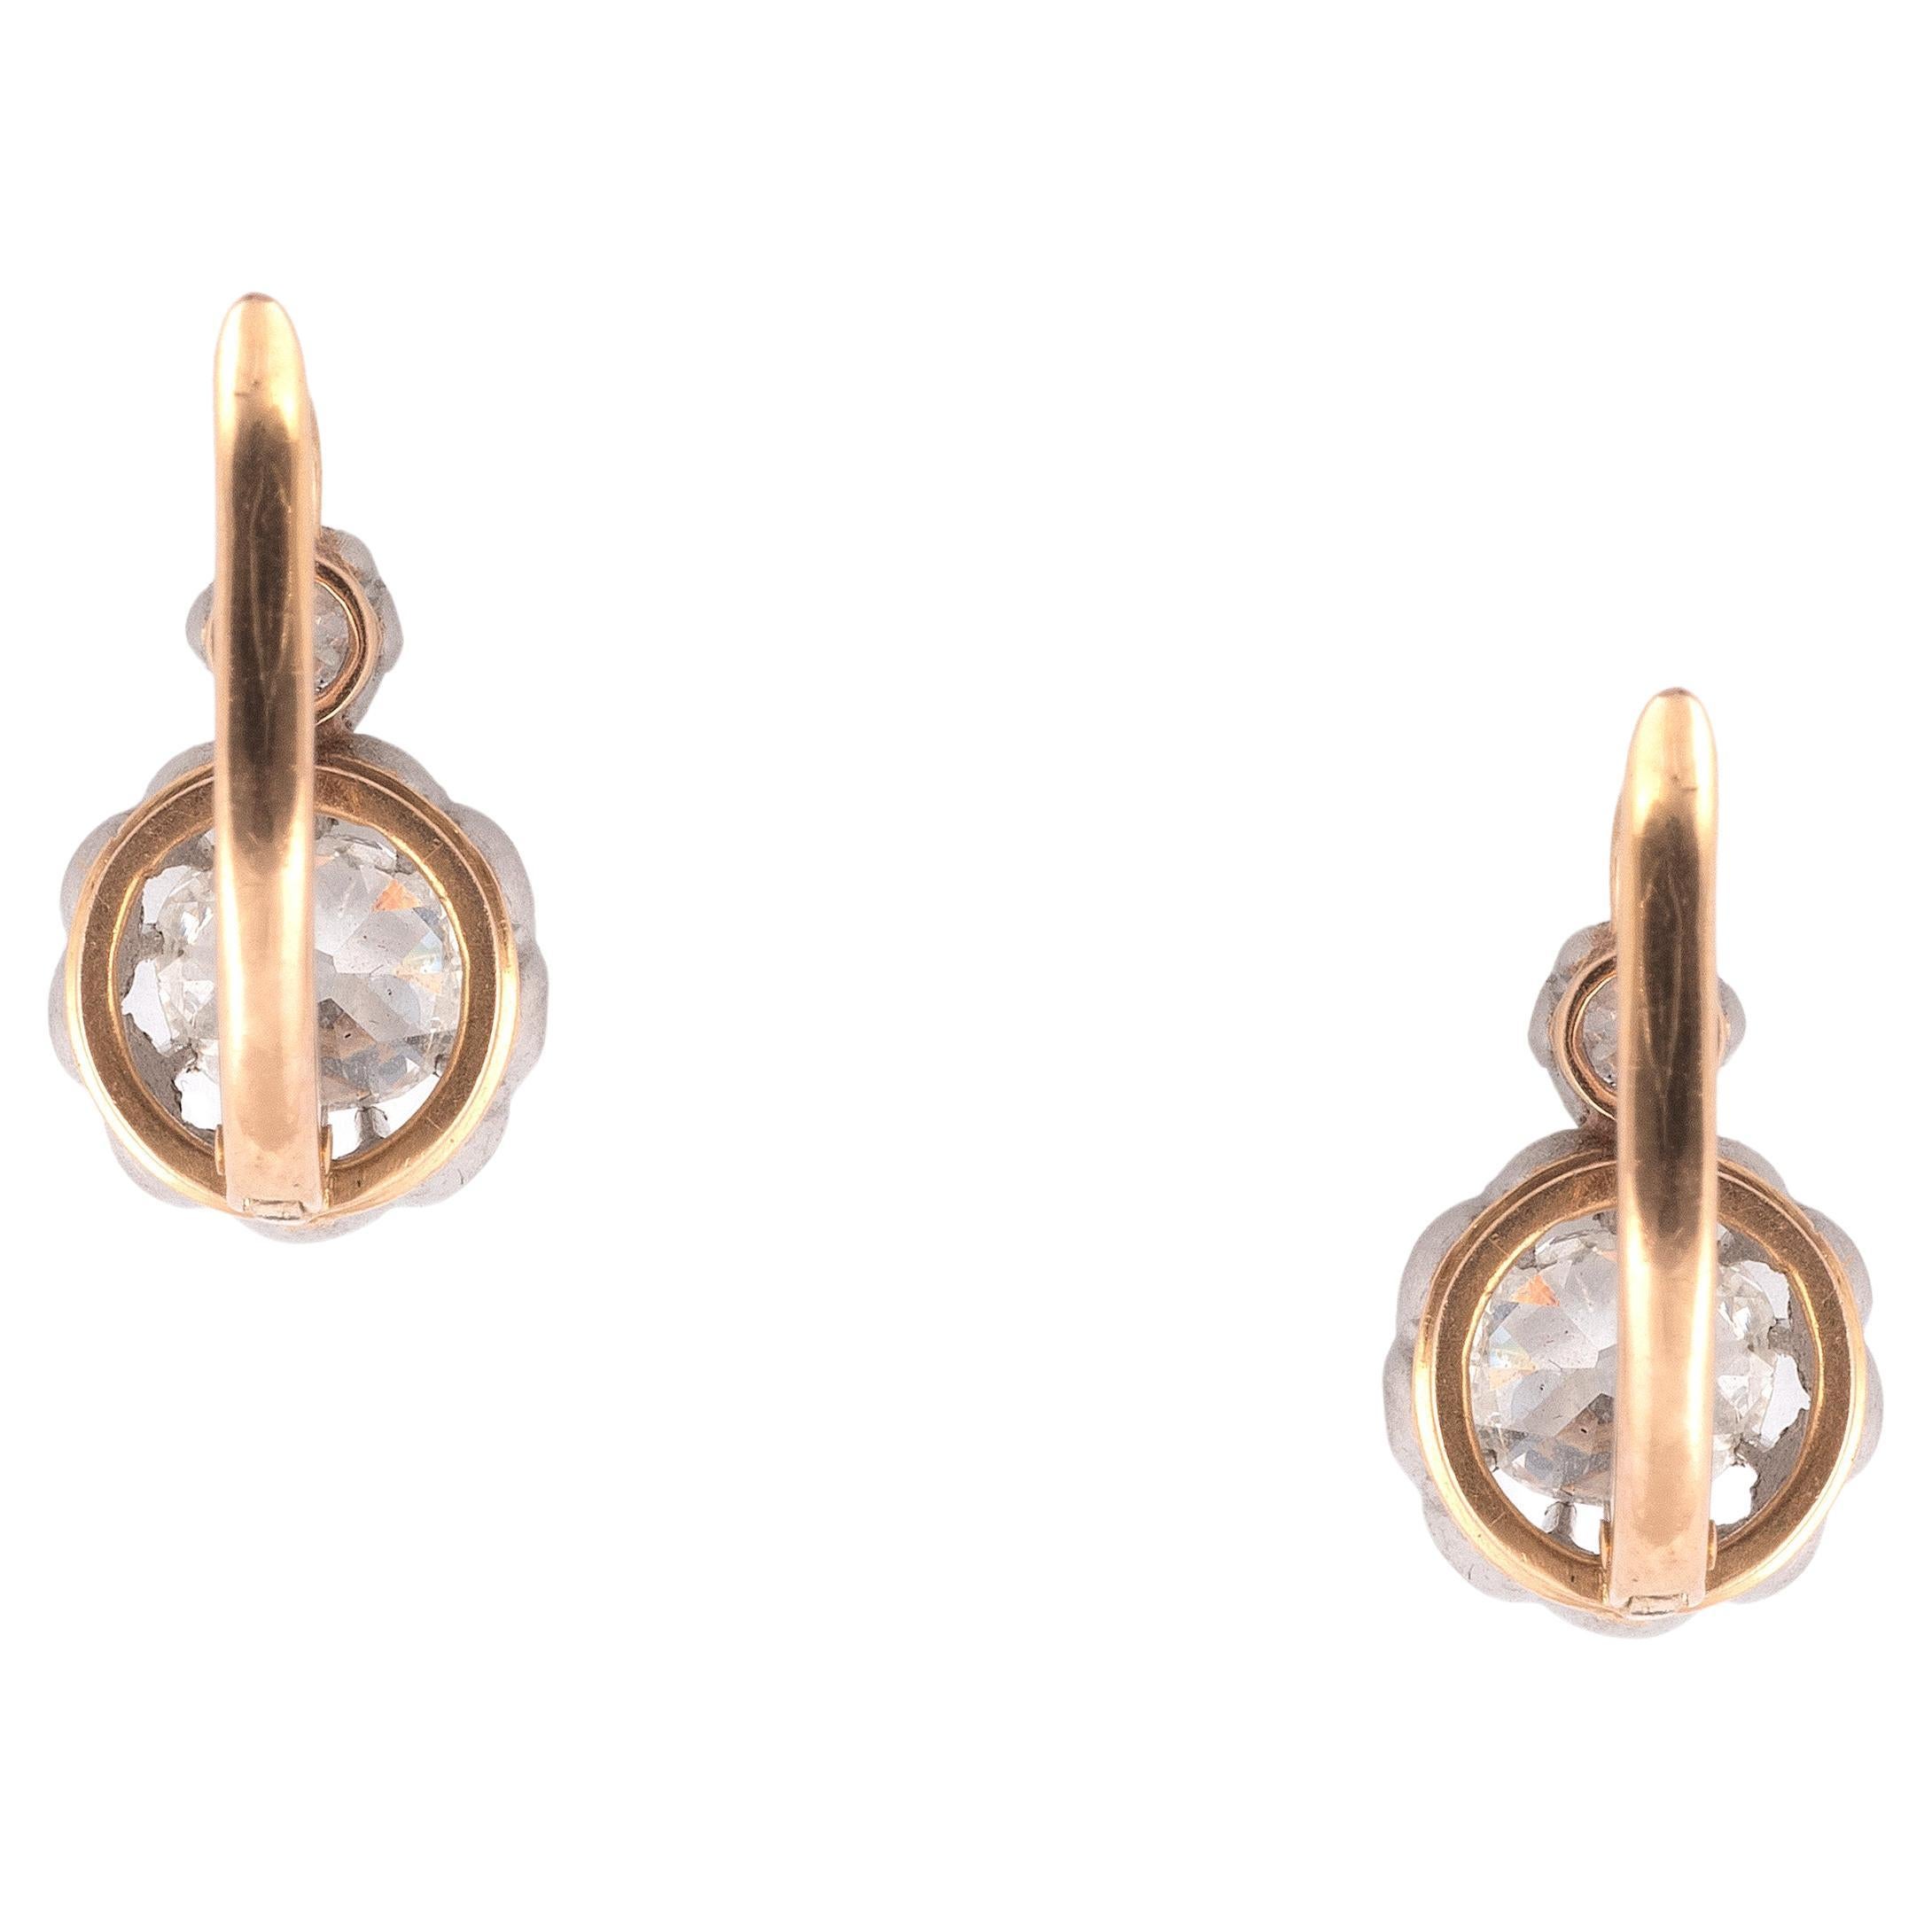 Pair of yellow gold 750 thousandths and platinum 850 thousandths dormeuses set with old-cut diamonds in claw-setting. Systems for pierced ears.
Weight of main diamonds: approx. 0.50 carat each.
Height : 1.5cm. Gross weight: 4.5g.